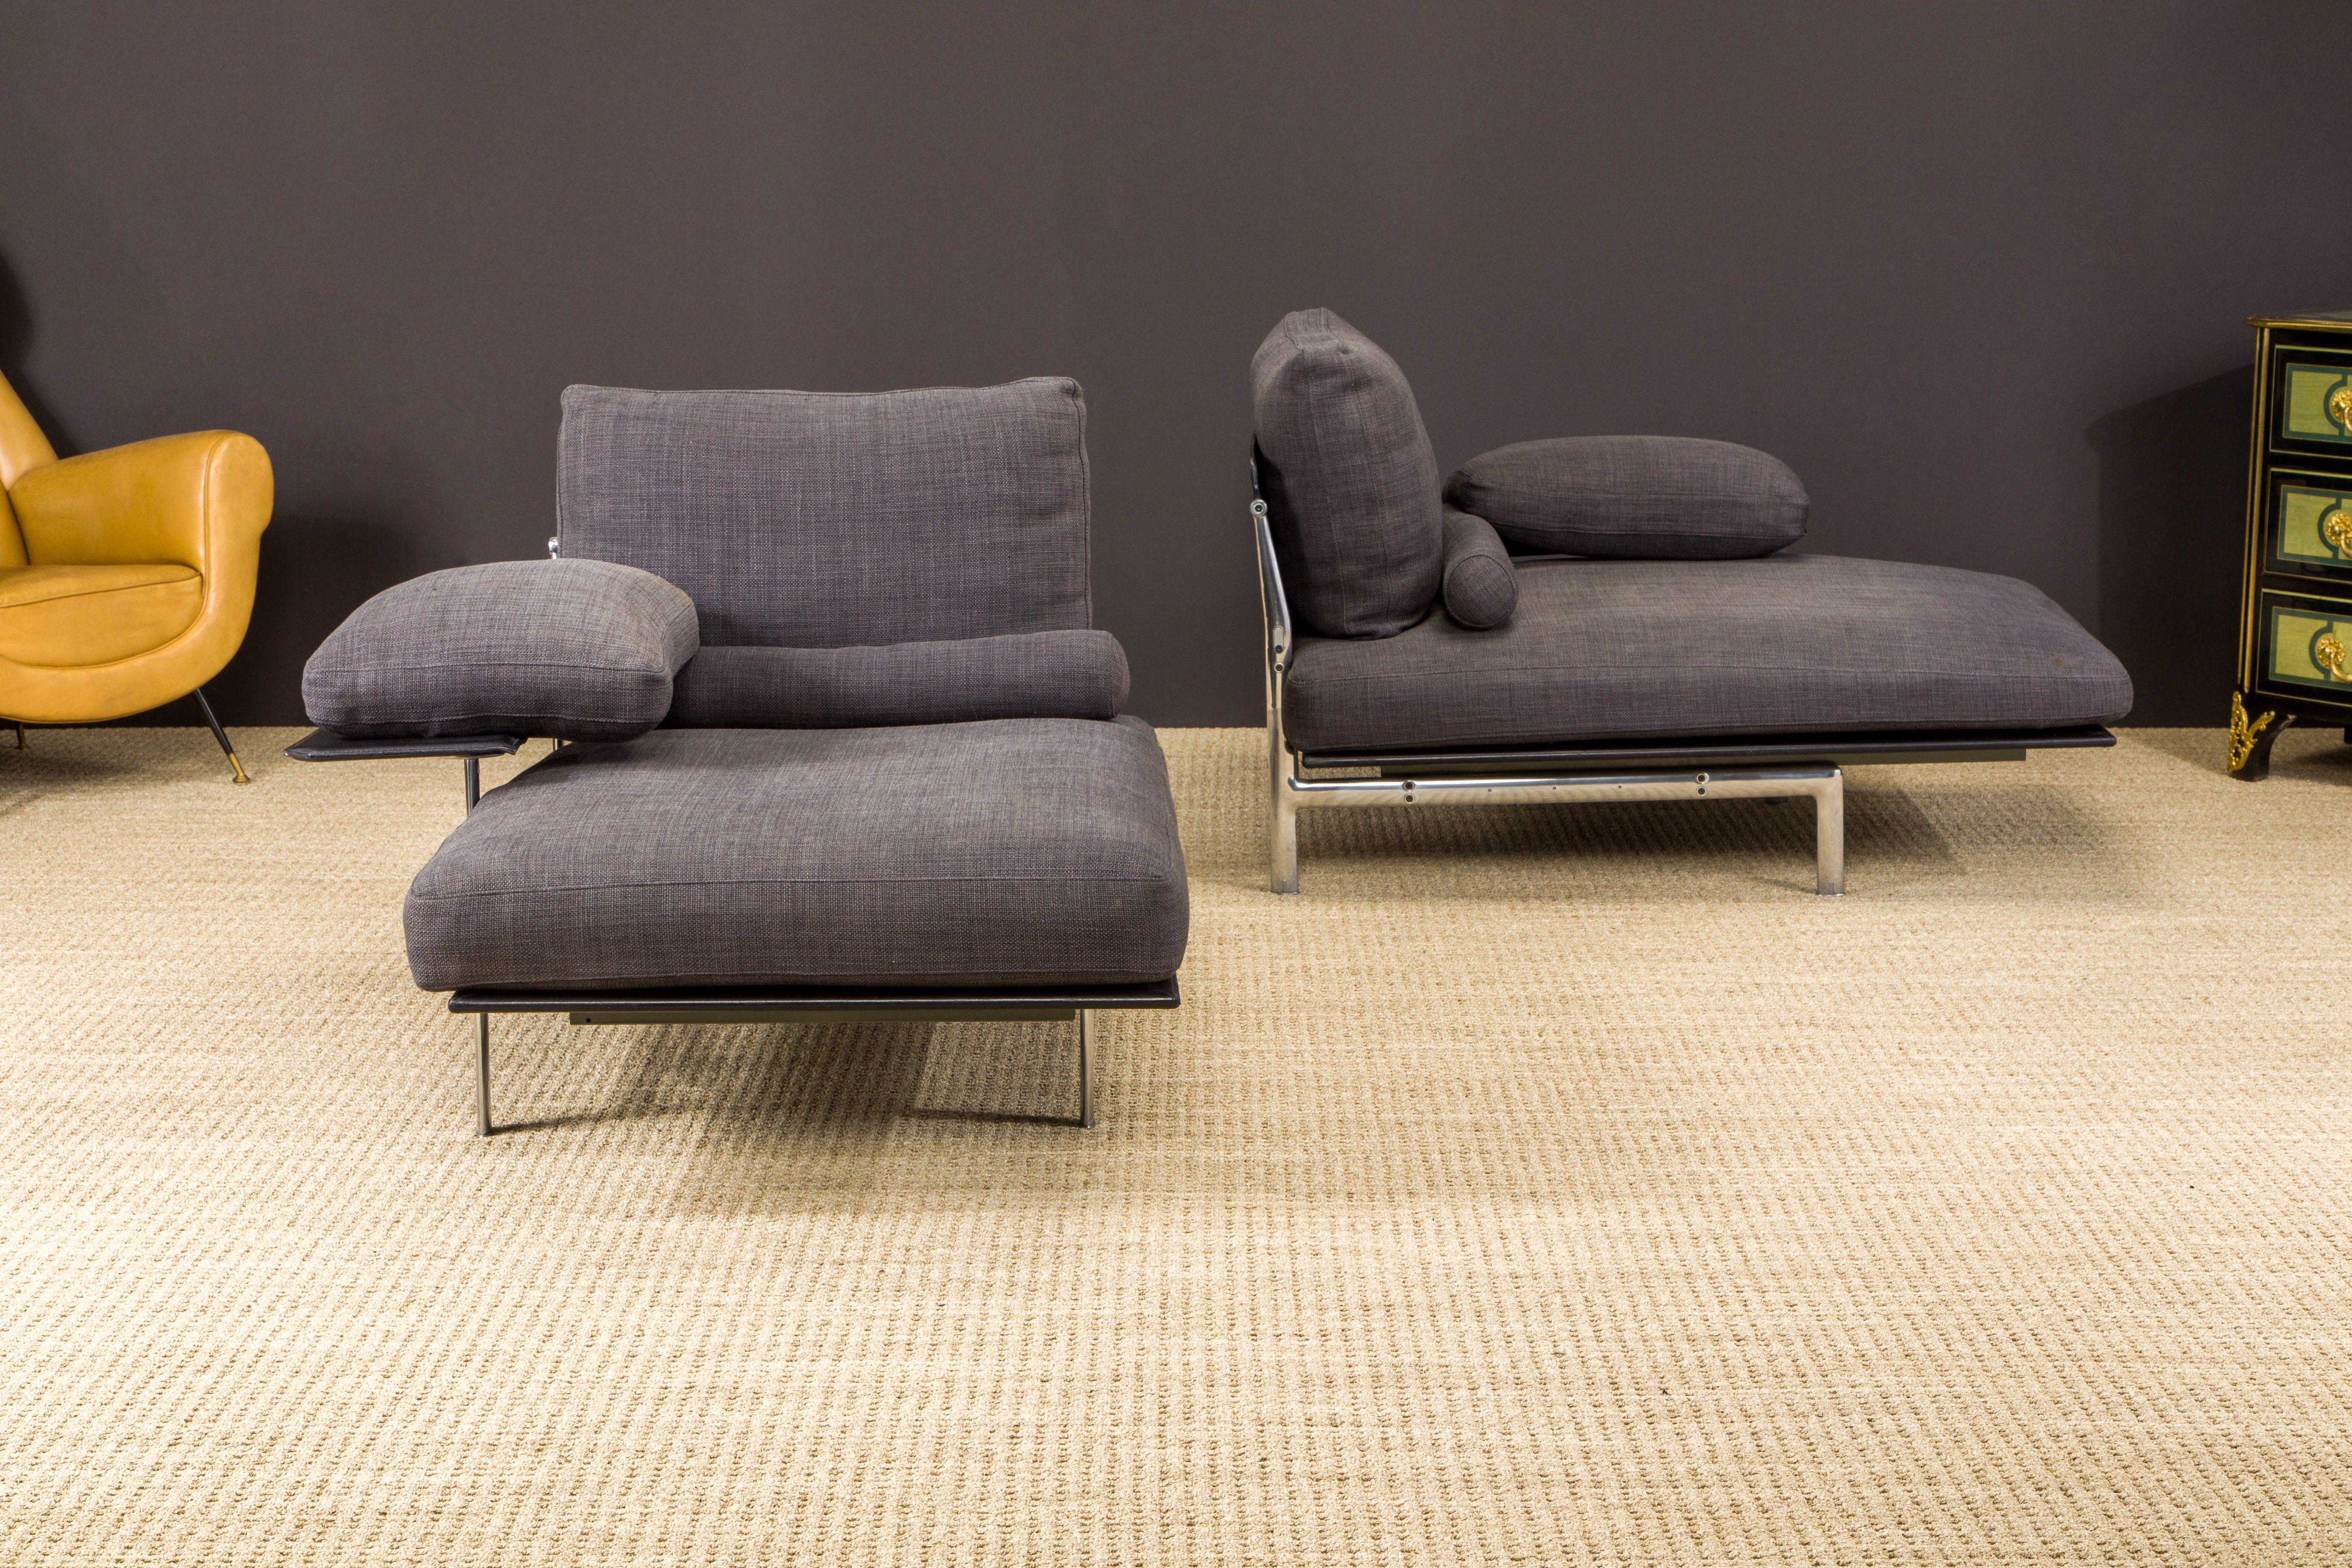 Contemporary Pair of 'Diesis' Chaise Lounges / Daybed by Paolo Nava for B&B Italia, Signed